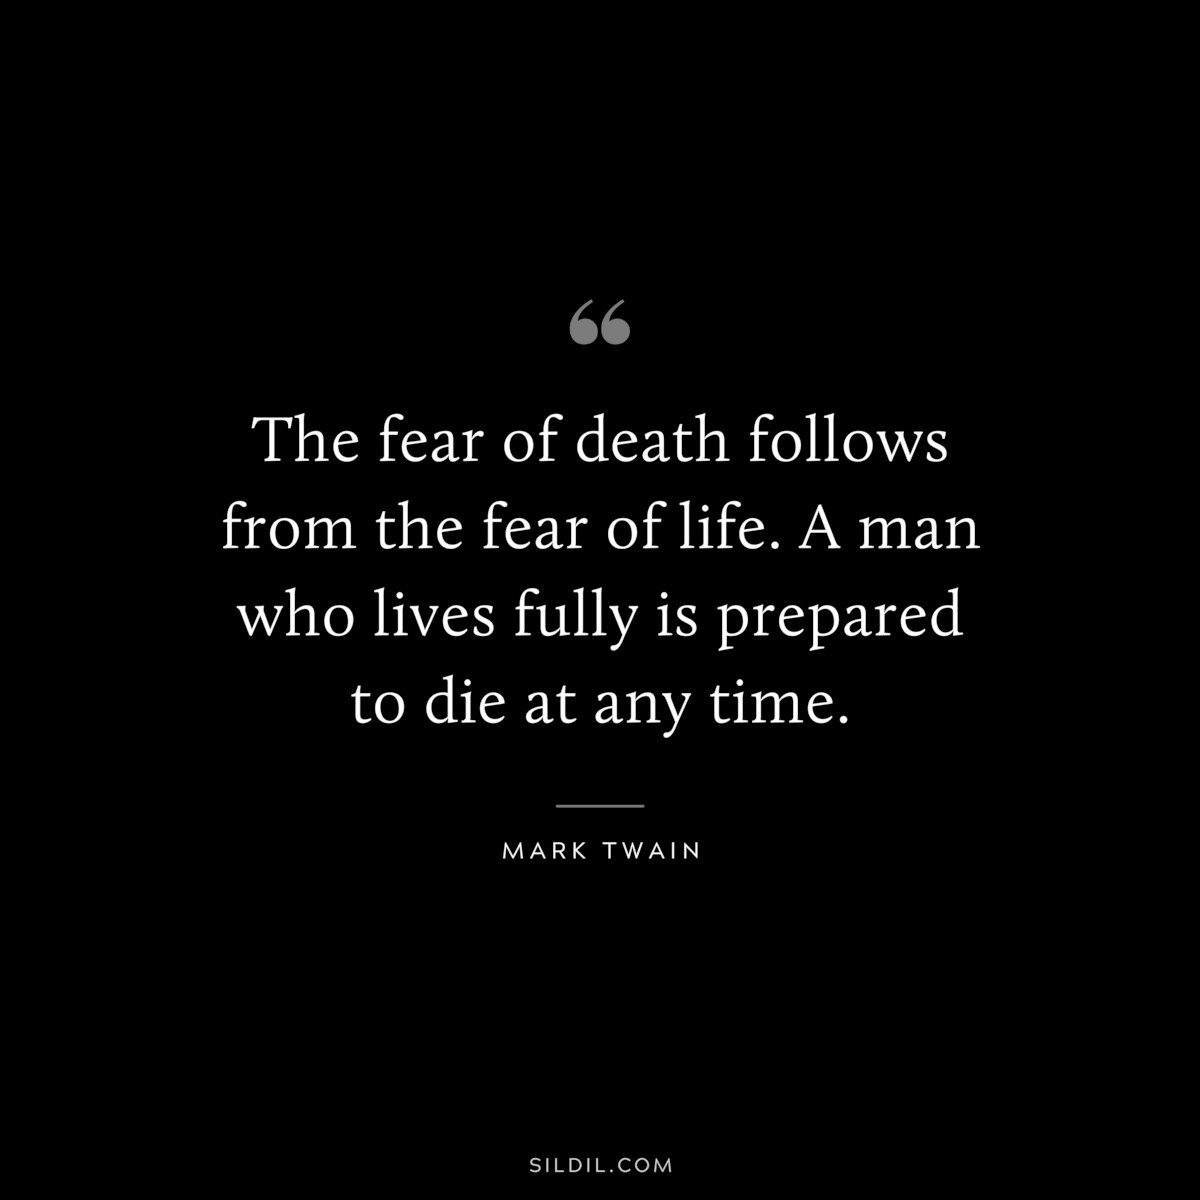 The fear of death follows from the fear of life. A man who lives fully is prepared to die at any time. ― Mark Twain